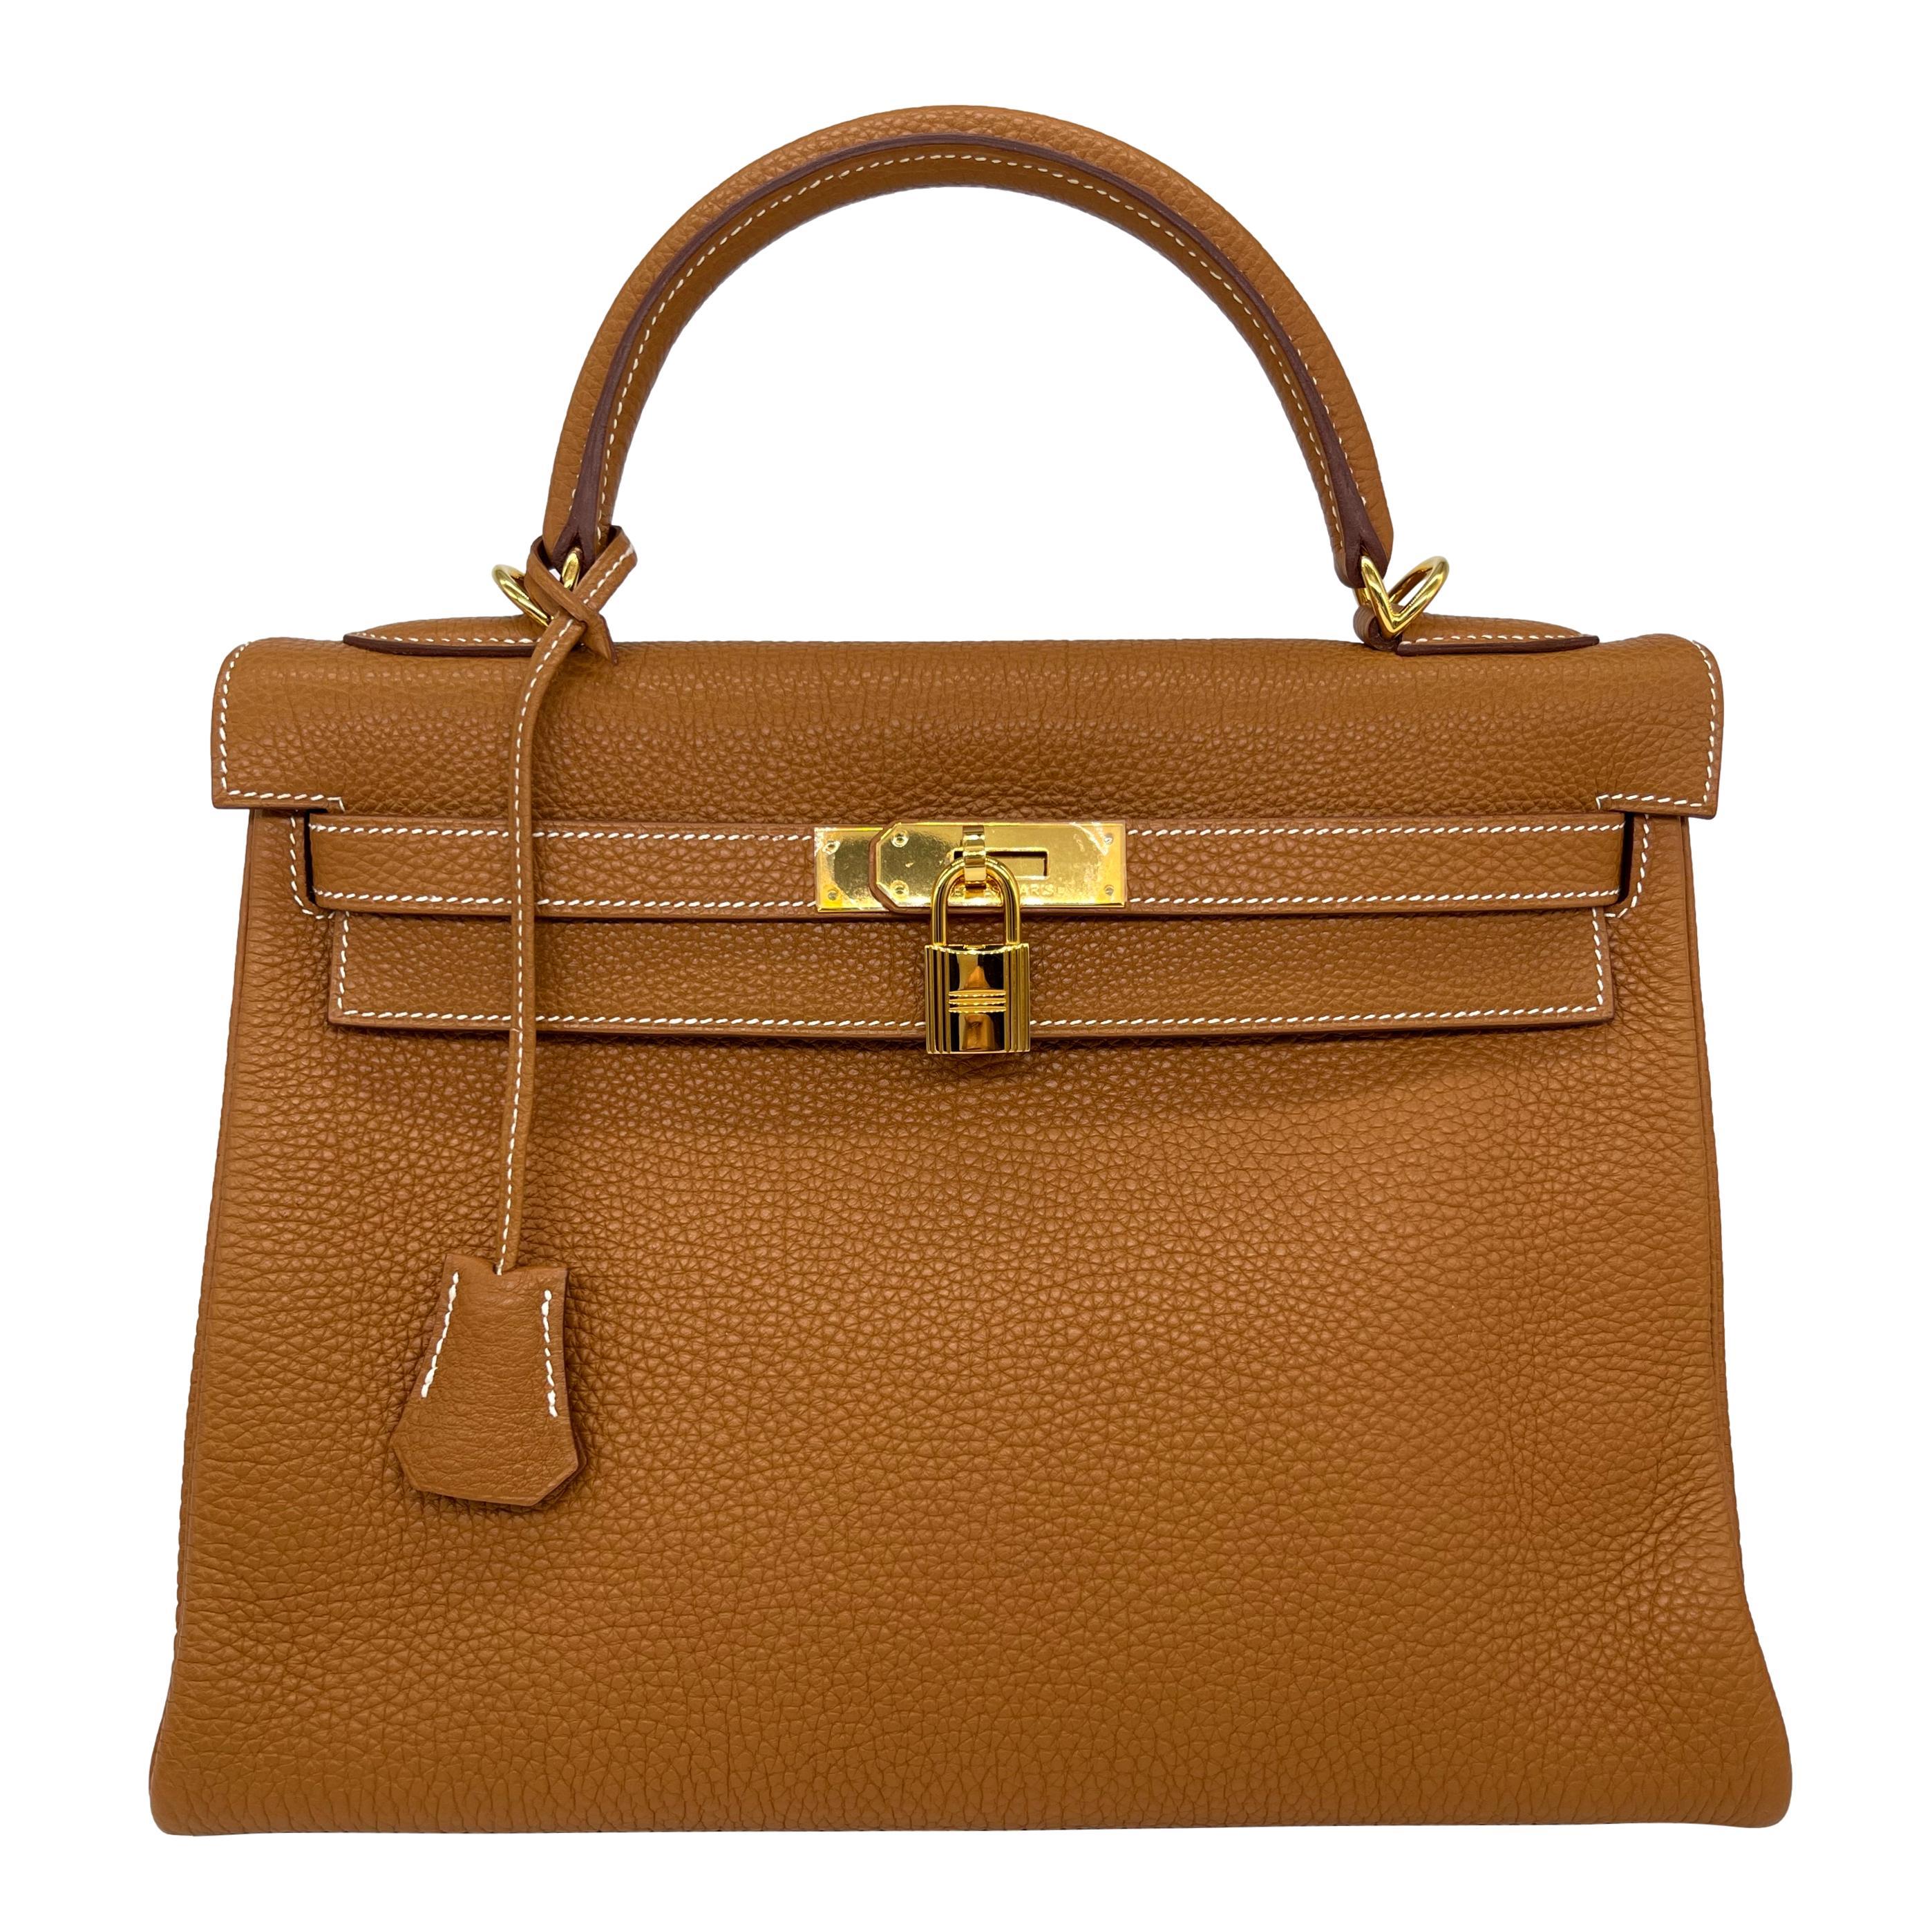 Hermès Natural Clemence Retourne Kelly Handbag with Gold Hardware 32cm, 2007. Originally introduced in the early 1930's as the Sac à dépêches bag, the Kelly became world renowned after Grace Kelly, Princess of Monaco appeared on the cover of Life